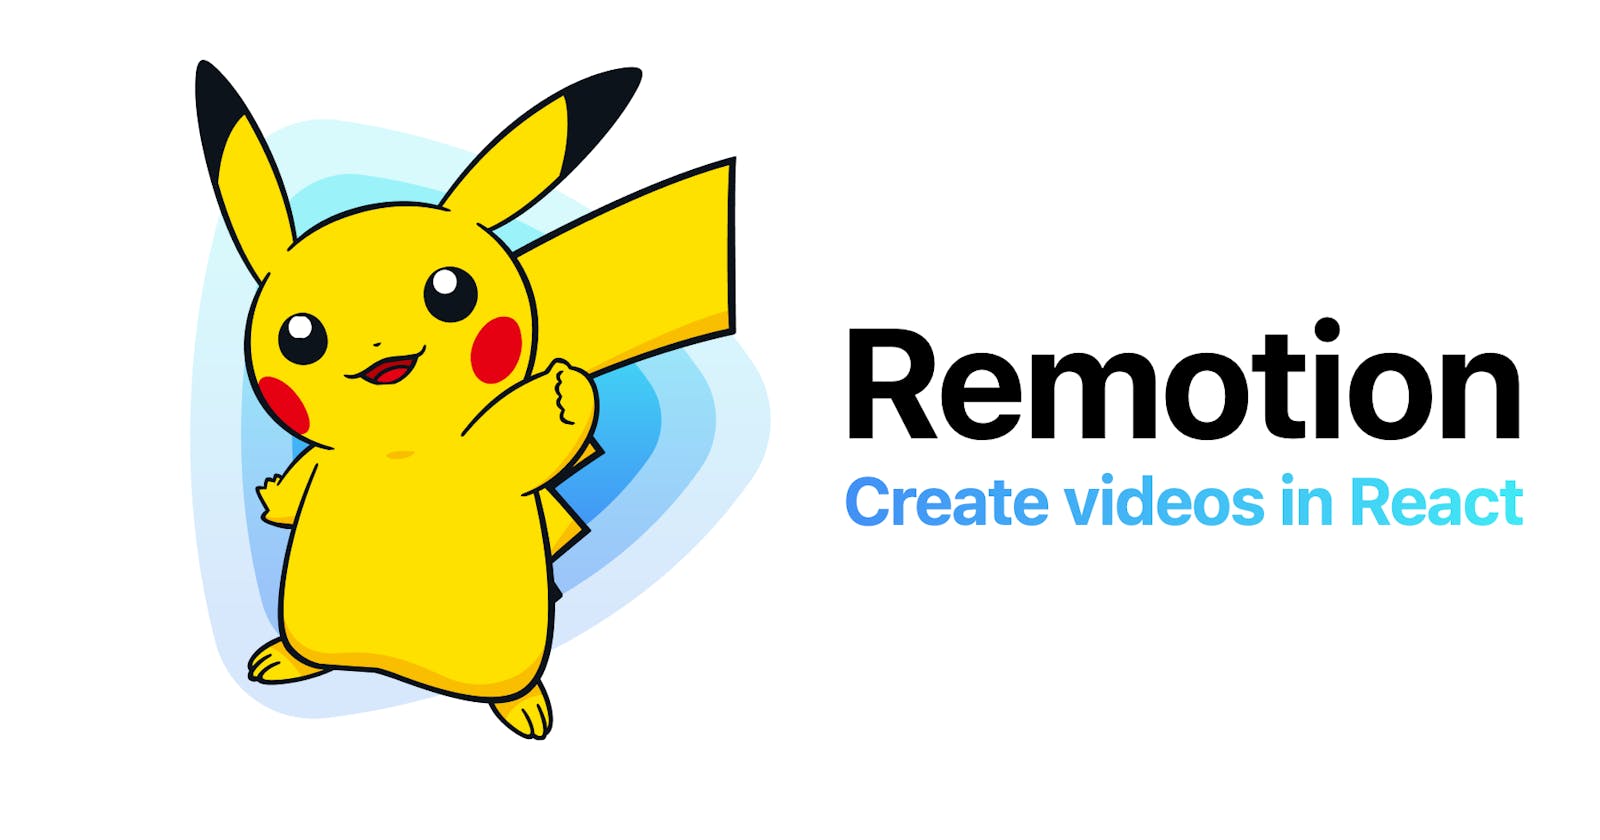 Remotion: Make a video of the original Kanto pokemon *from code* Part 2